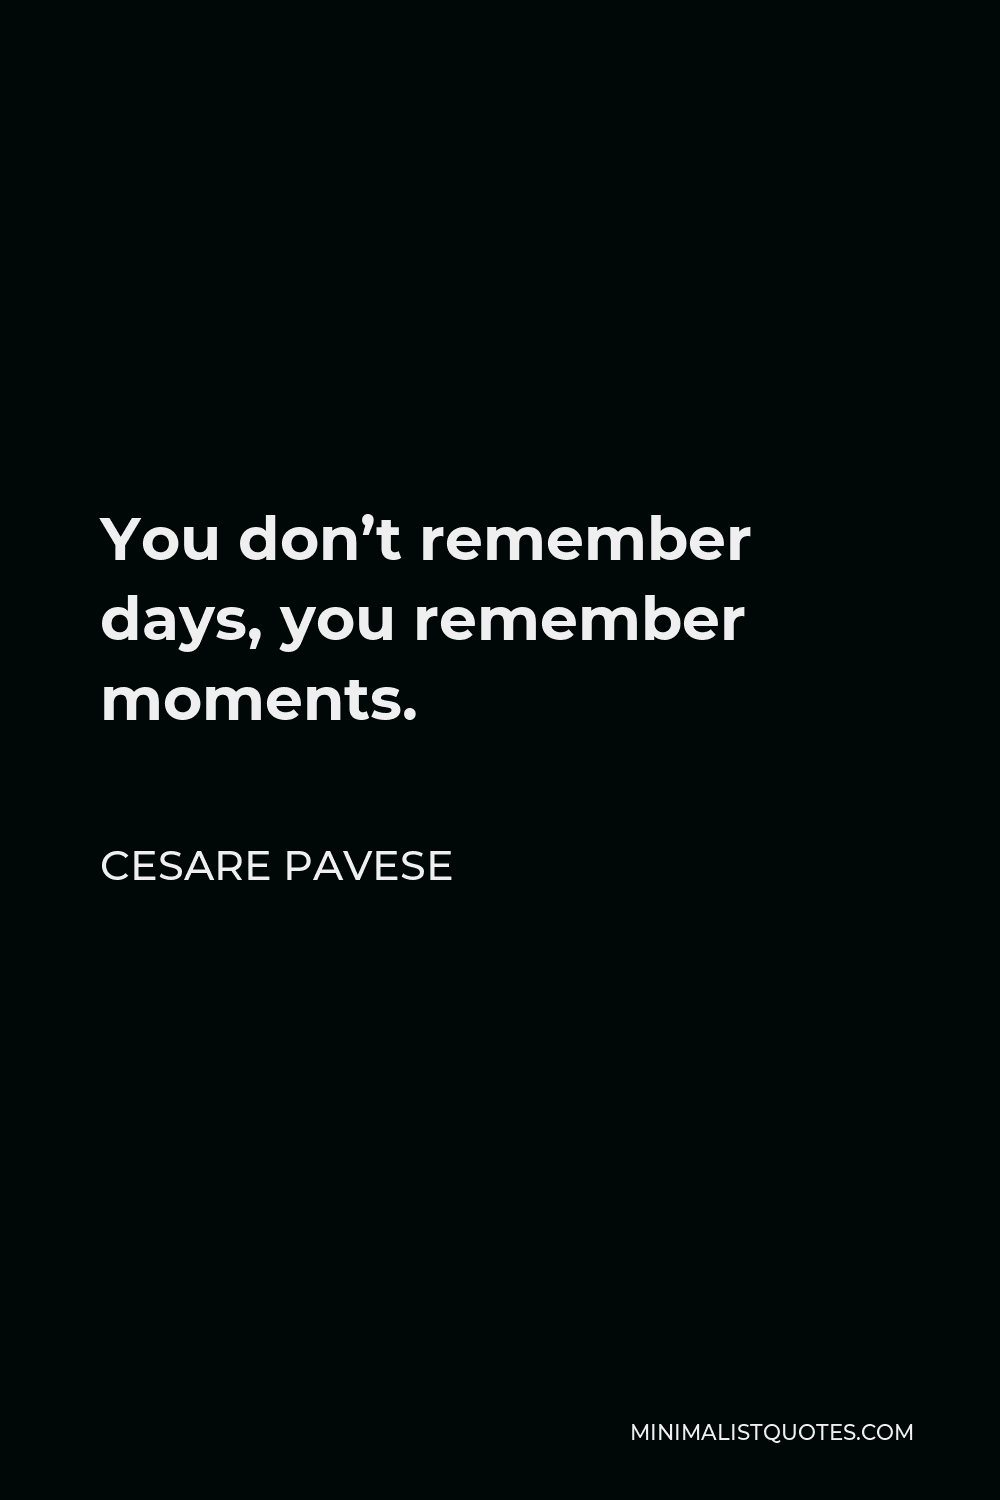 Cesare Pavese Quote - You don’t remember days, you remember moments.